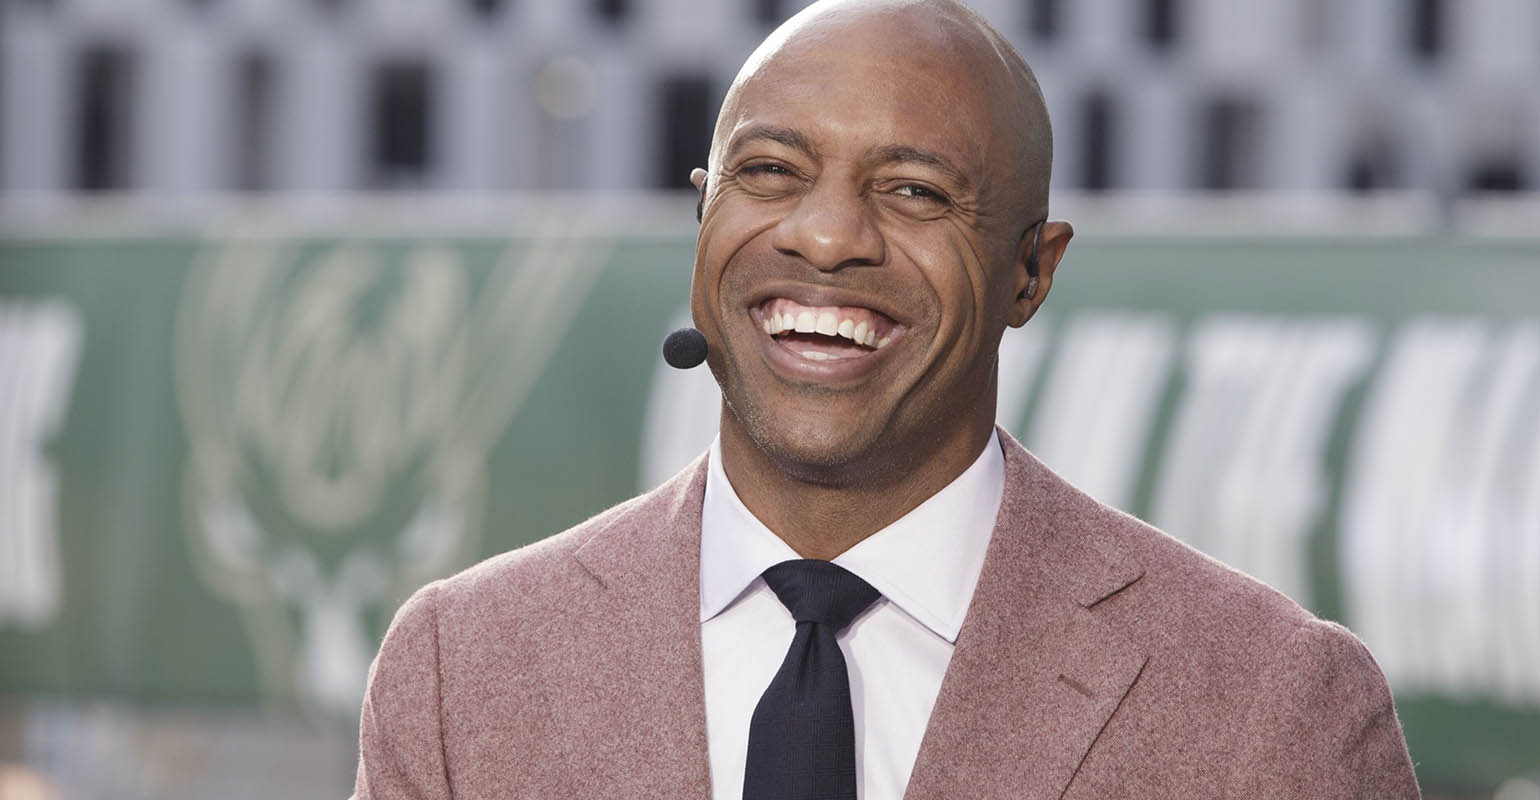 Shenkman Faucets Former NBA Participant Jay Williams for Board